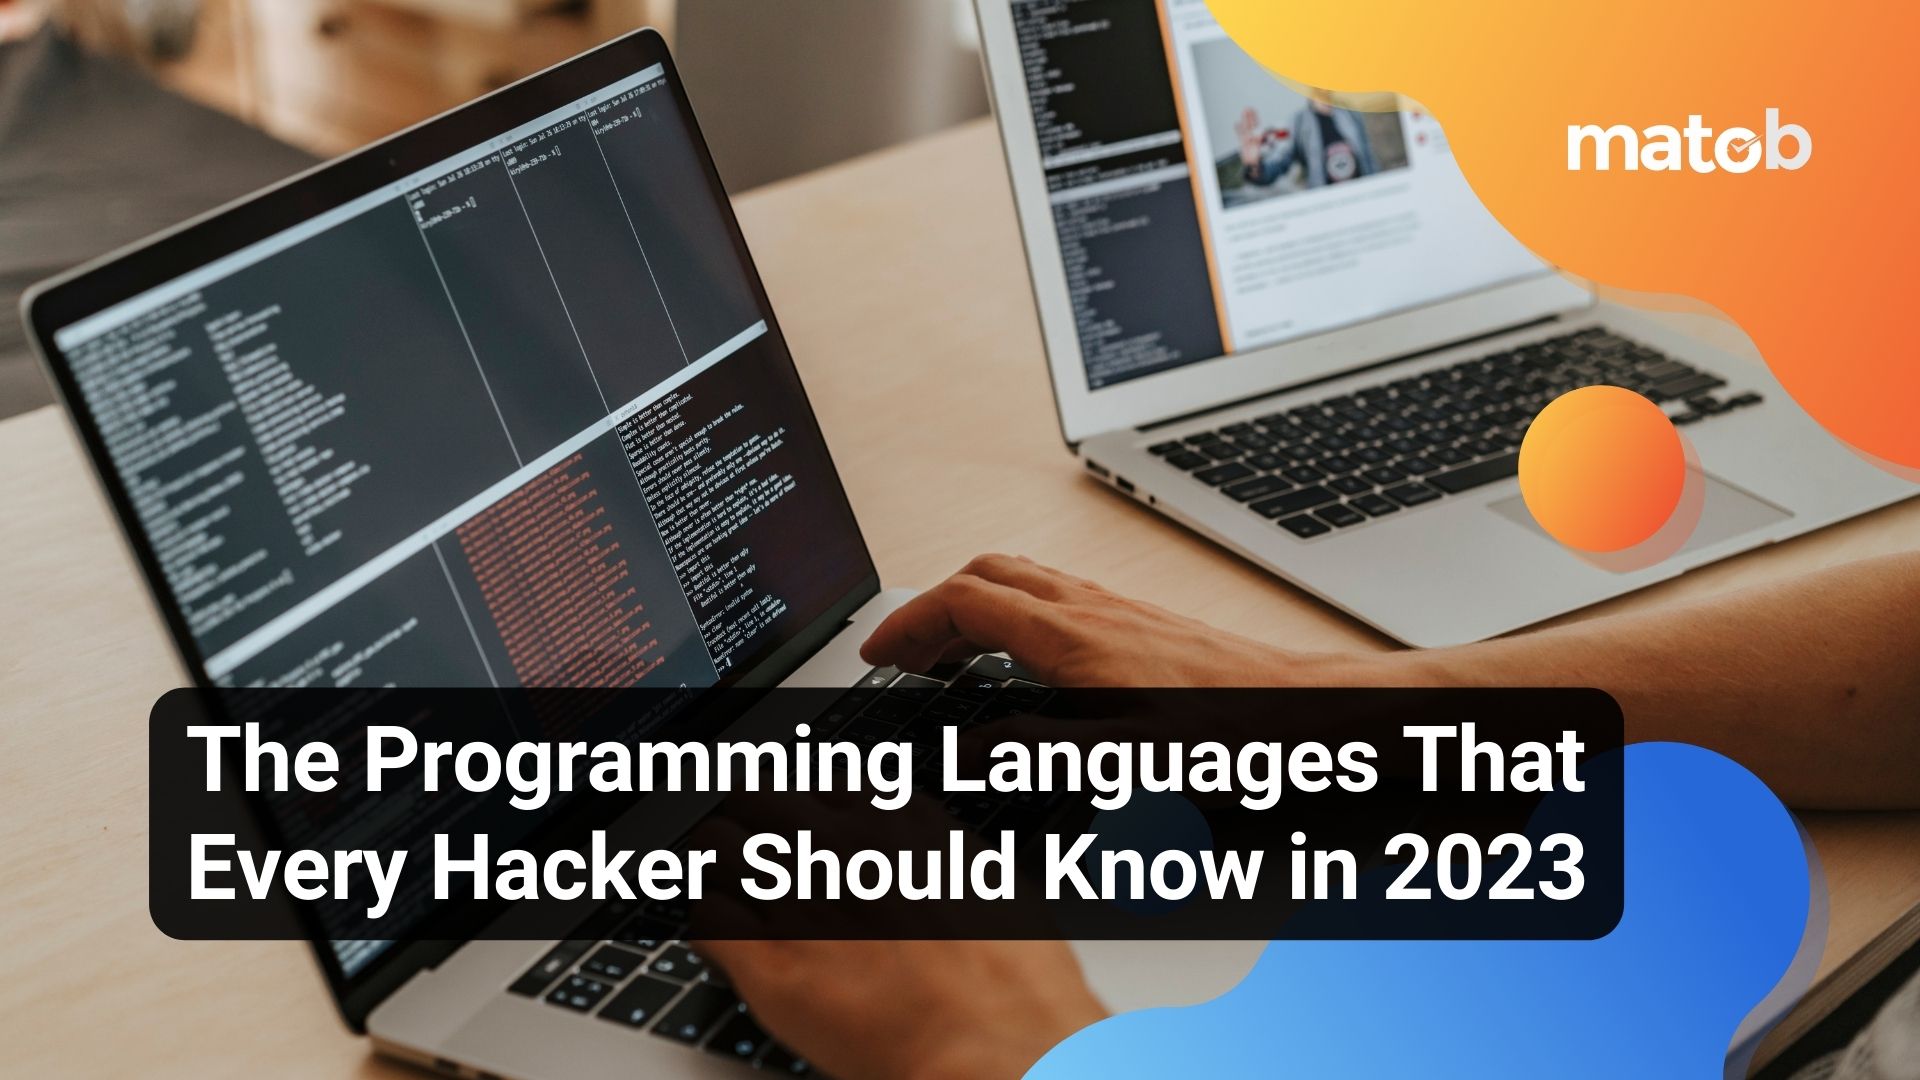 The Programming Languages That Every Hacker Should Know in 2023